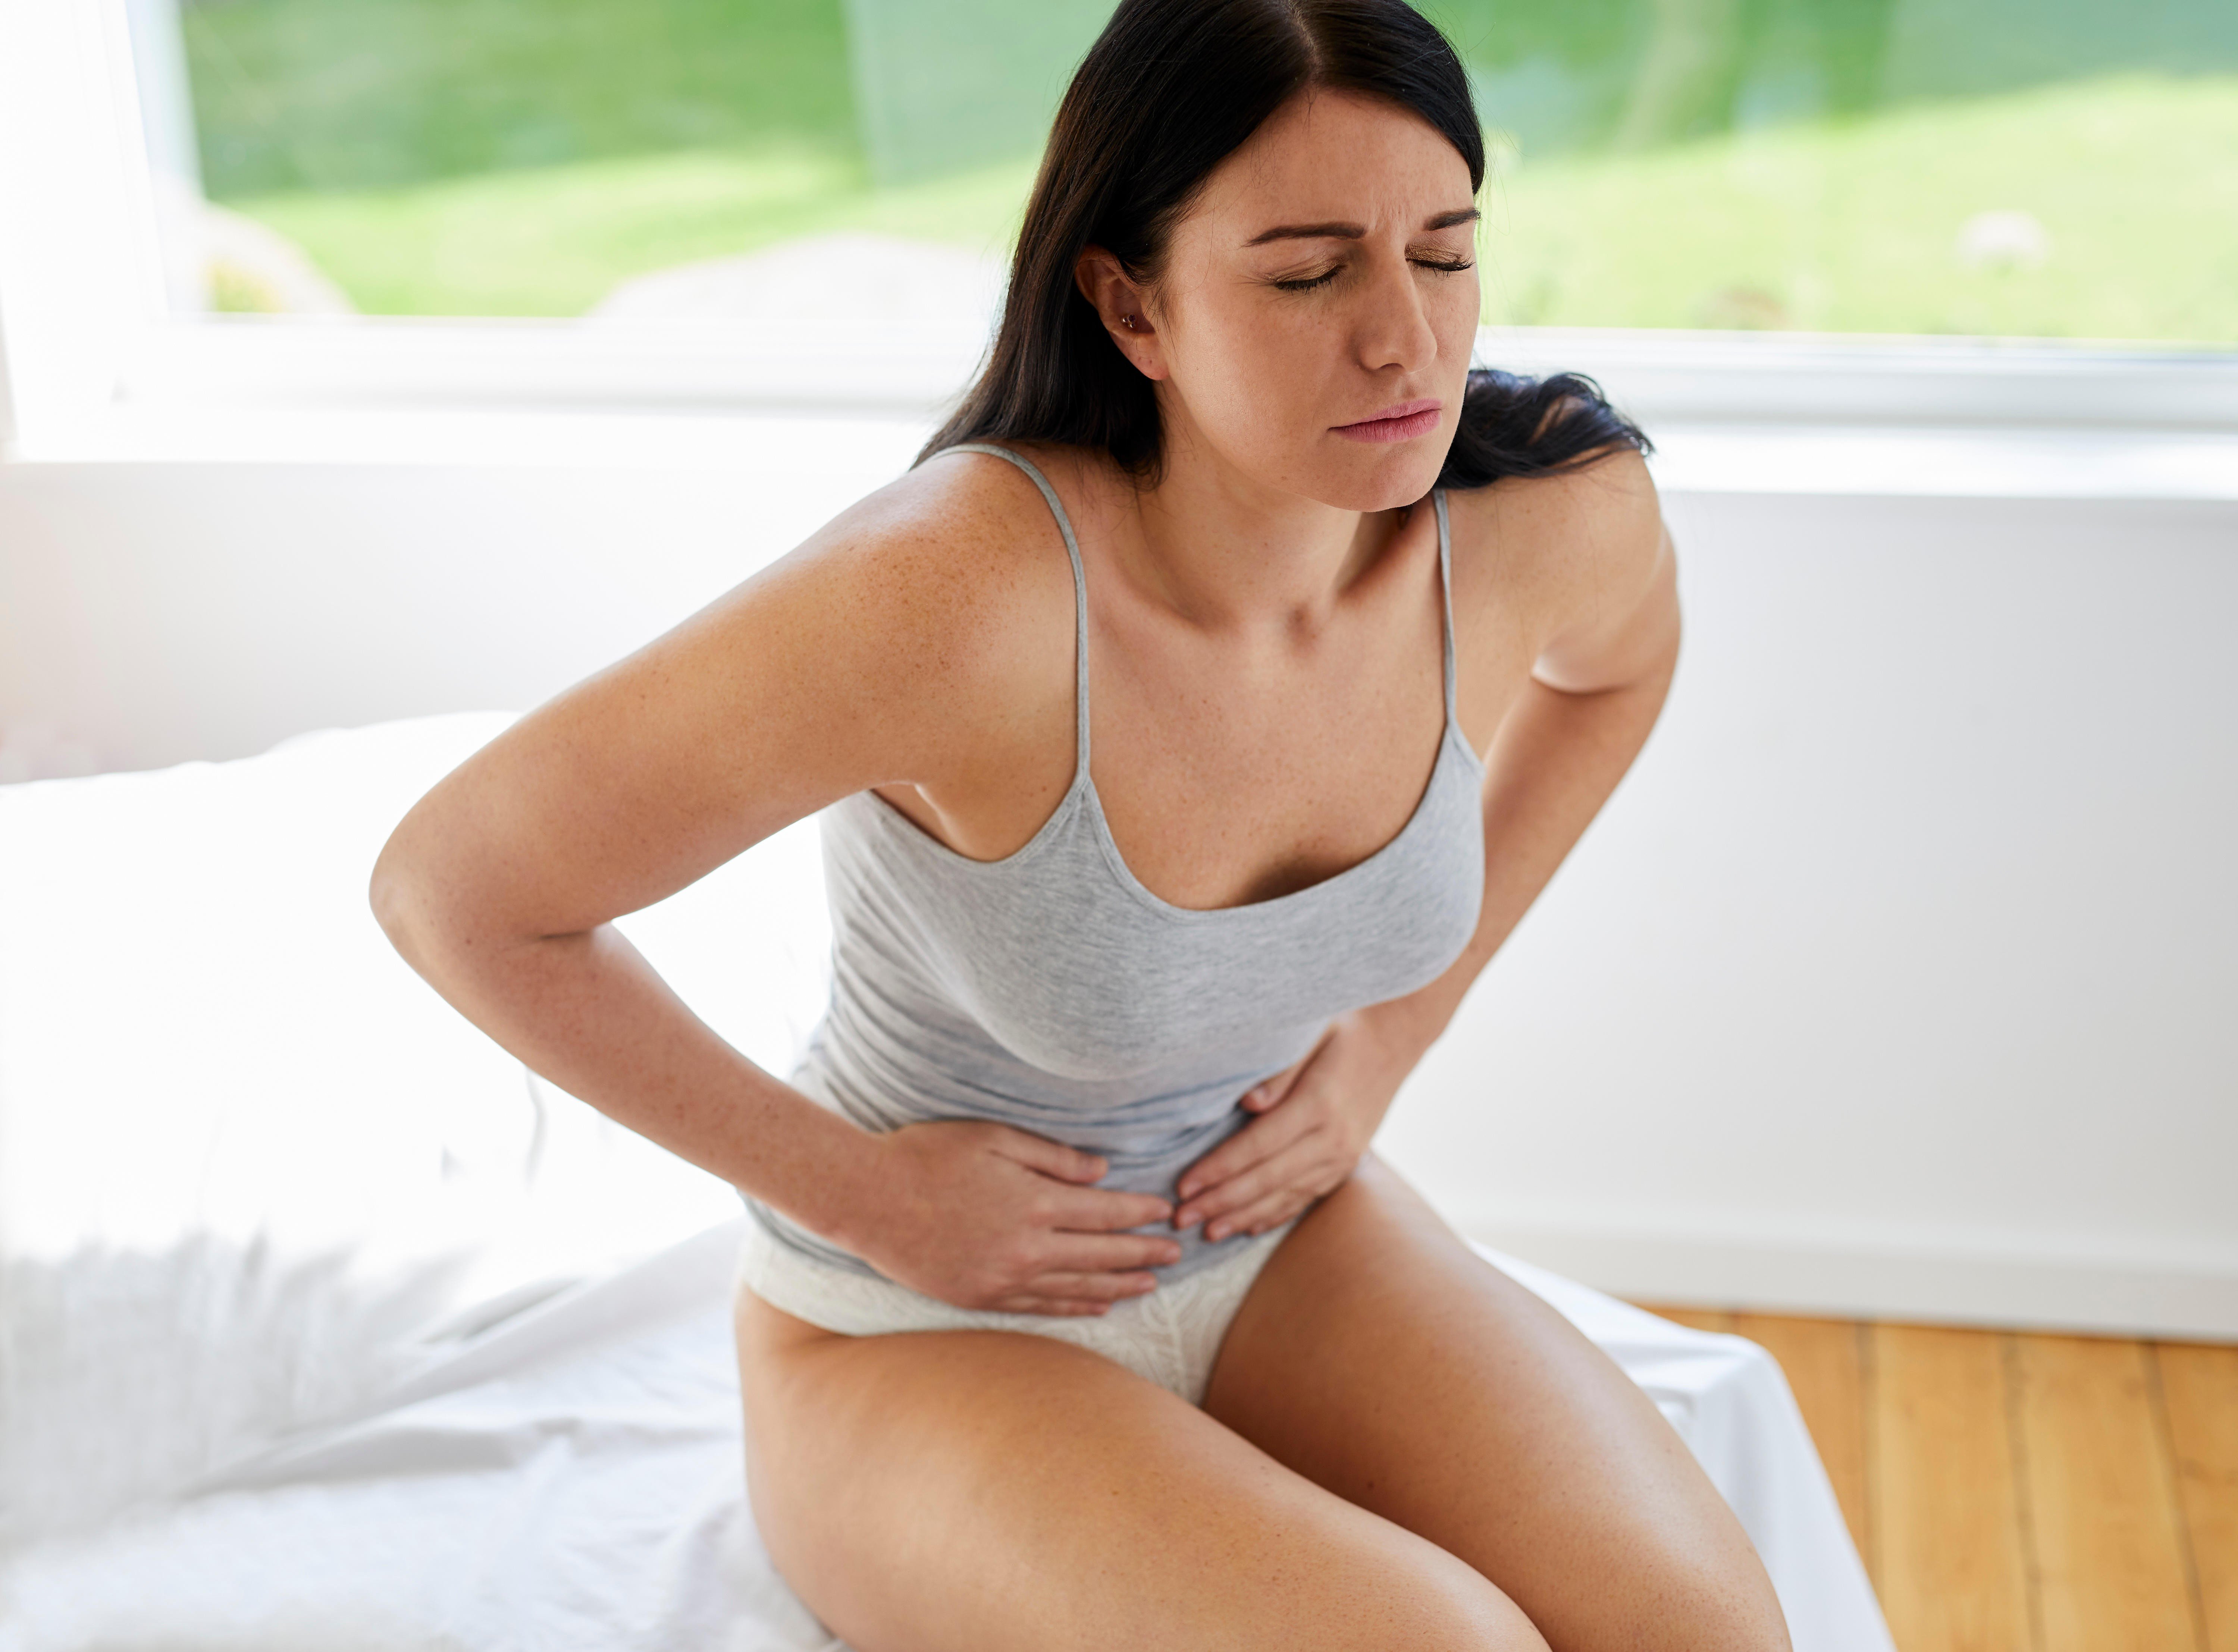 Menstrual Pain: Why Does it Happen? - Blogs - Makati Medical Center